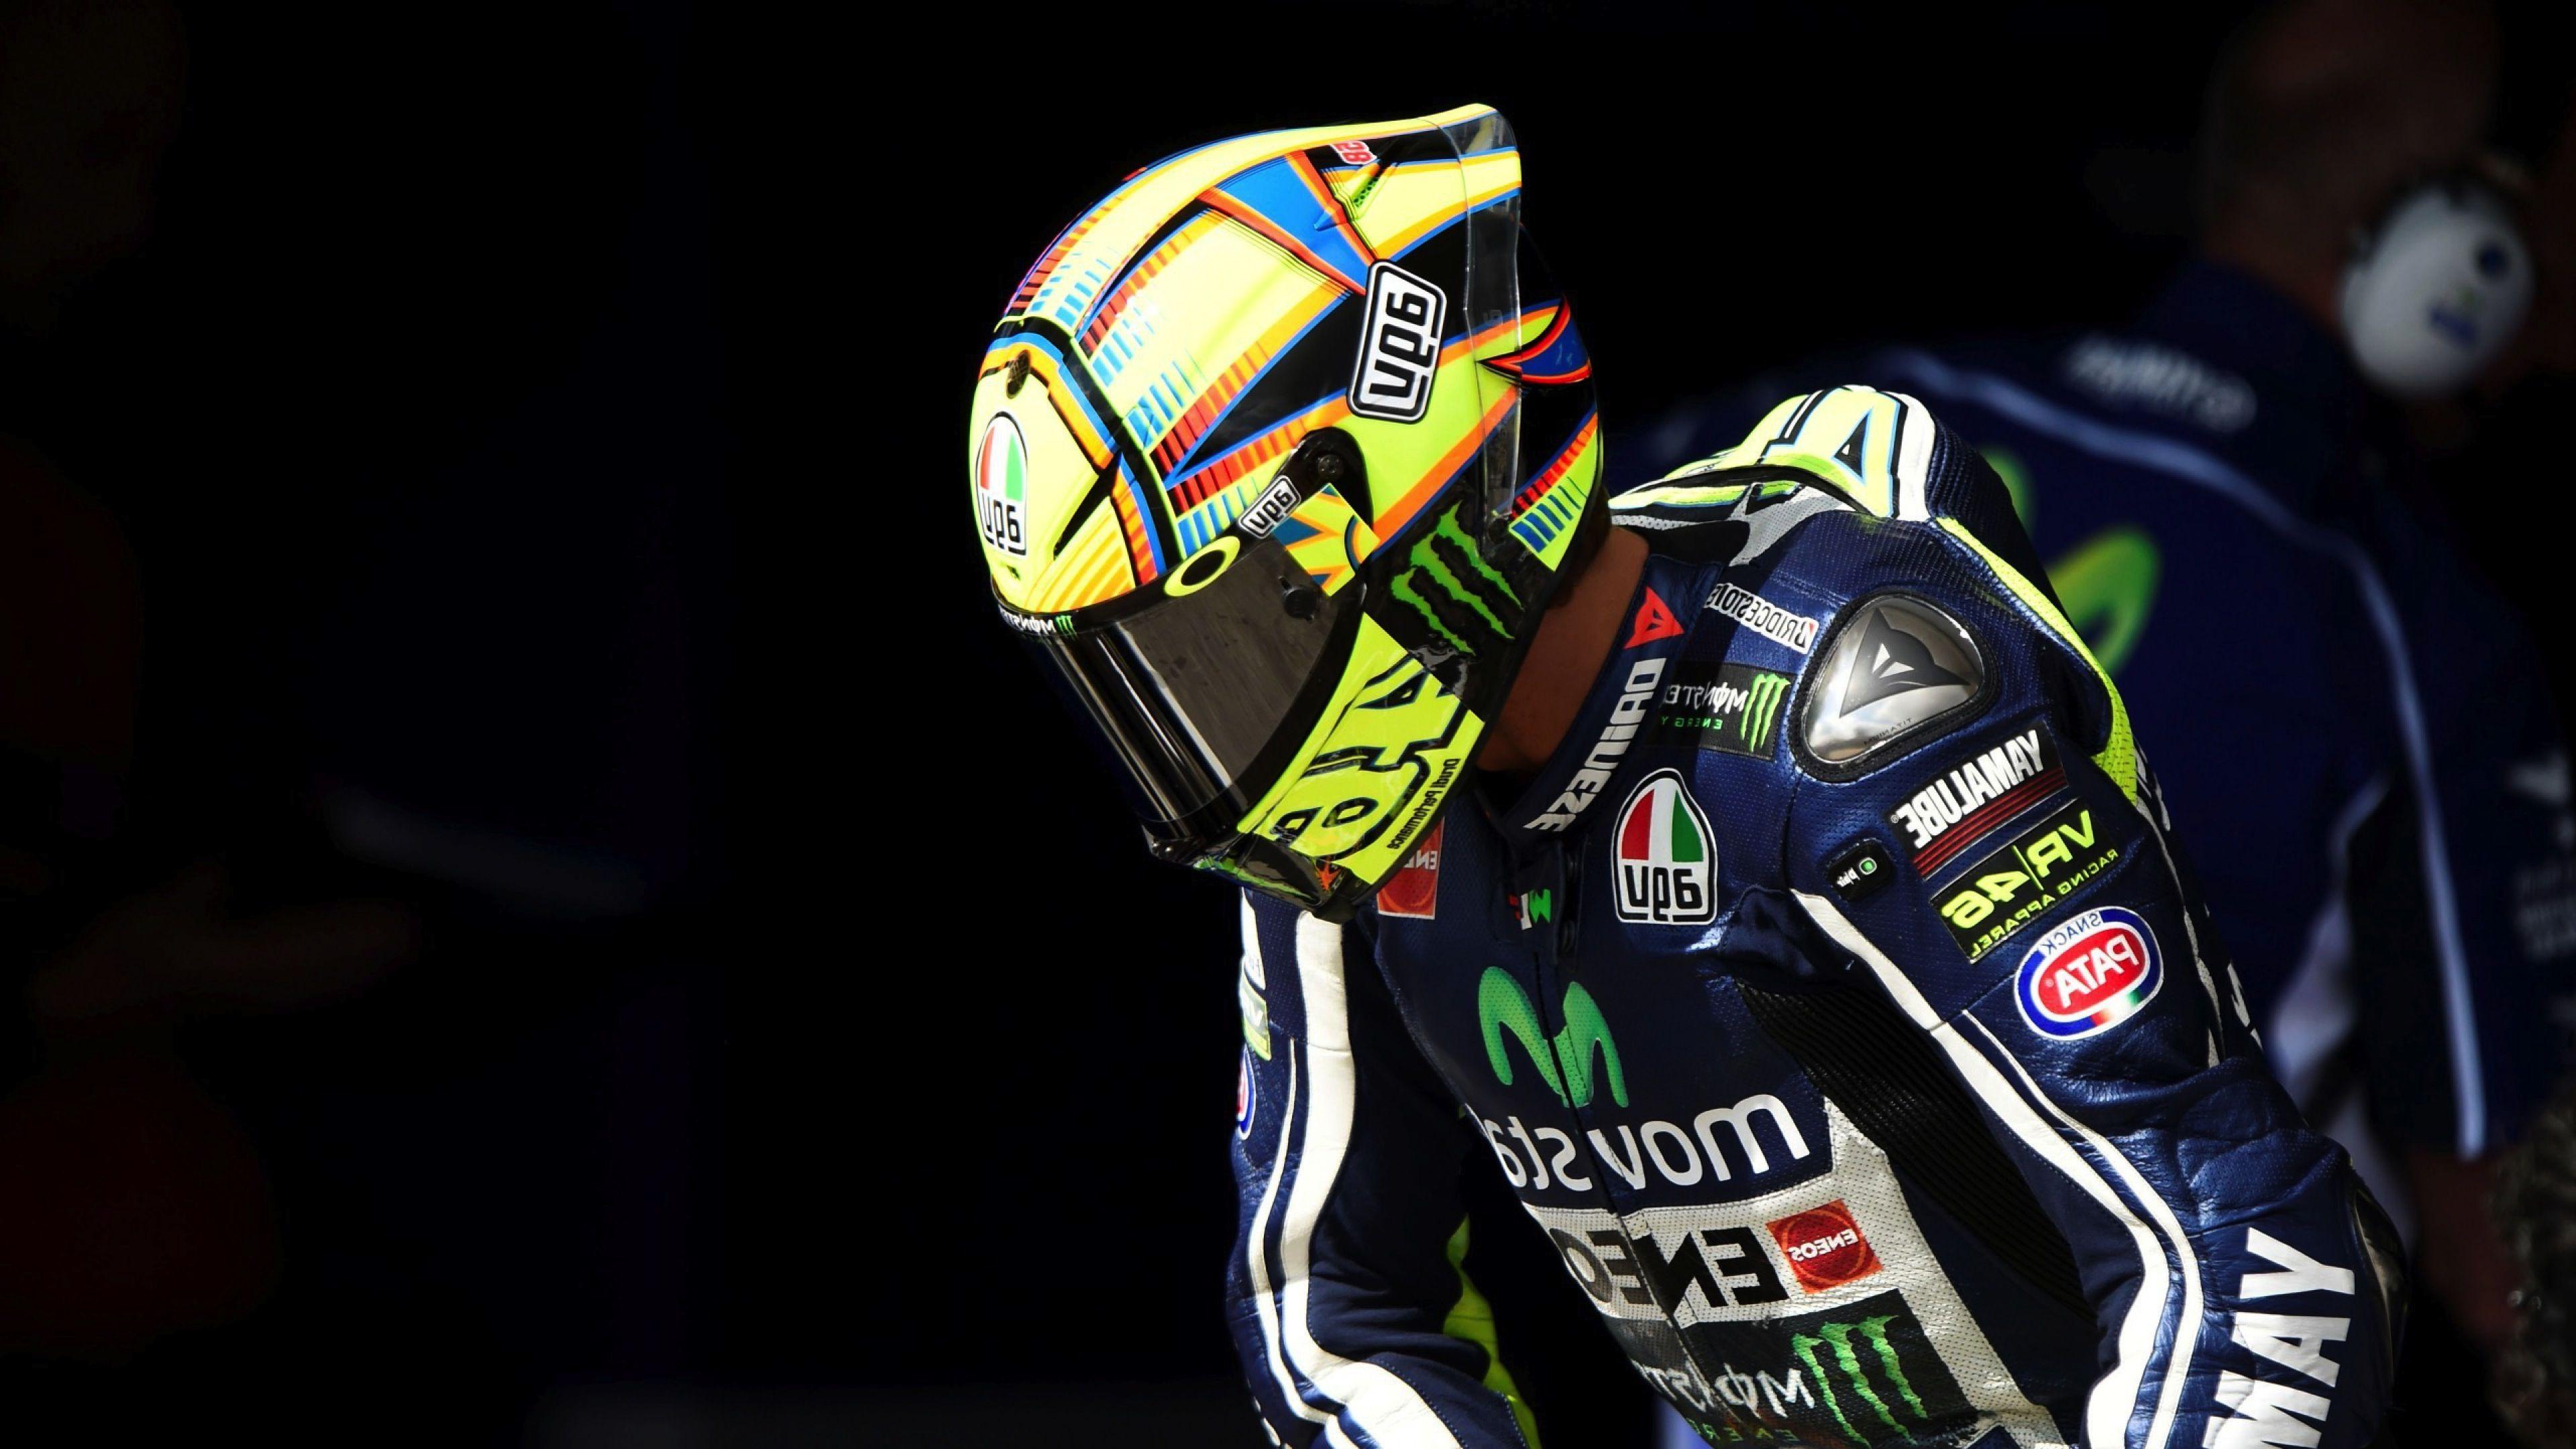 New Valentino Rossi Wallpaper. Download High Quality HD Image